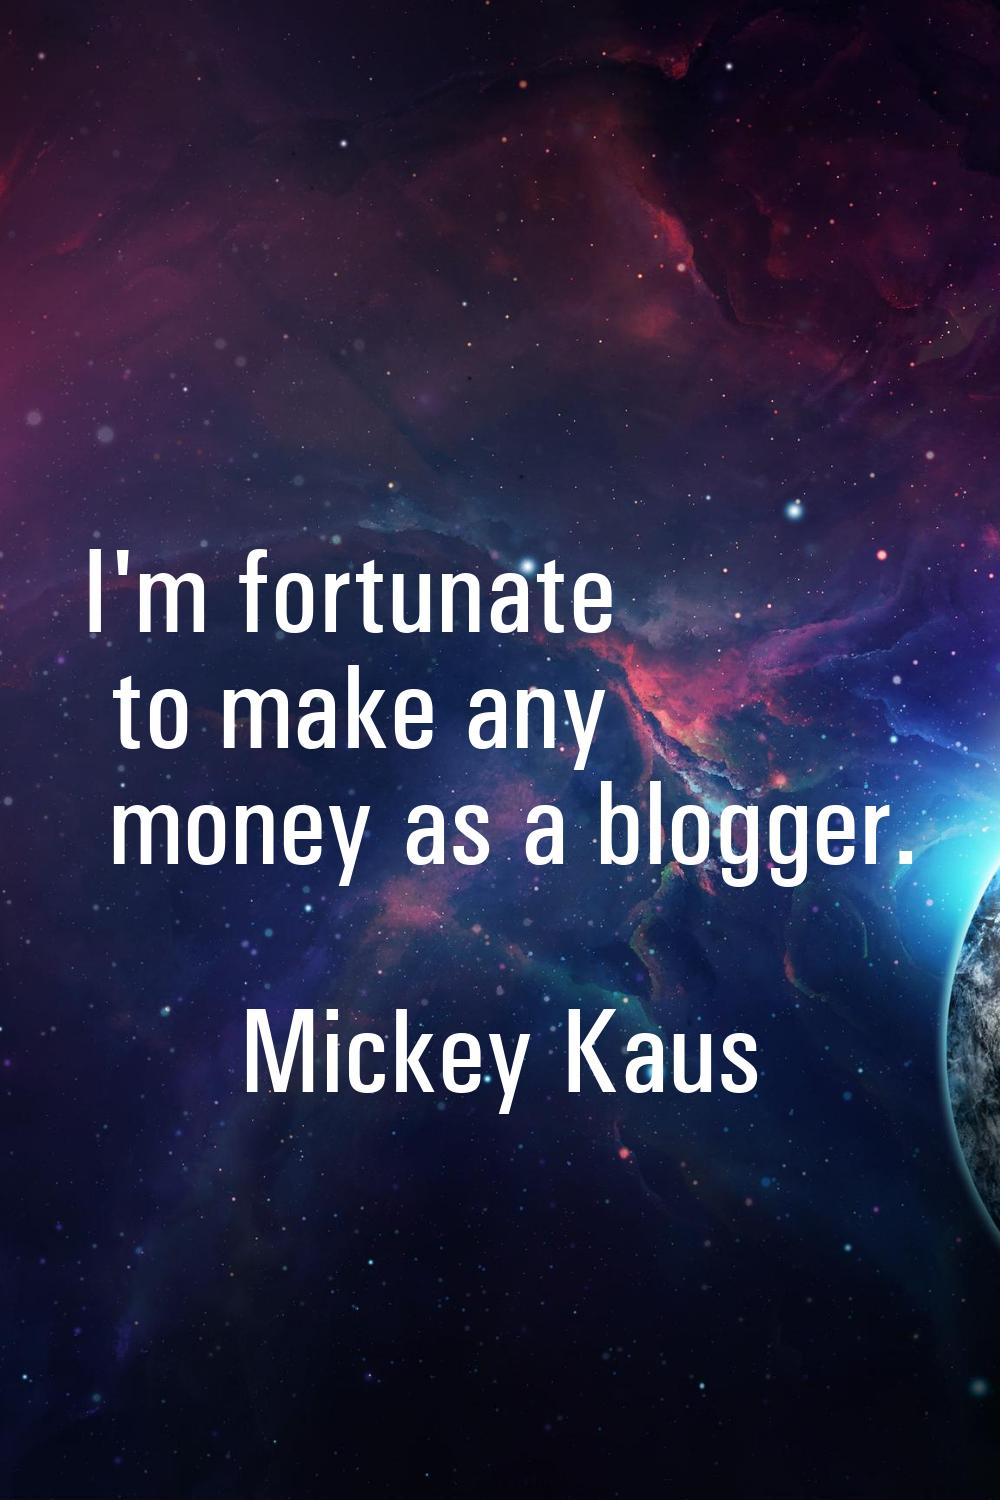 I'm fortunate to make any money as a blogger.